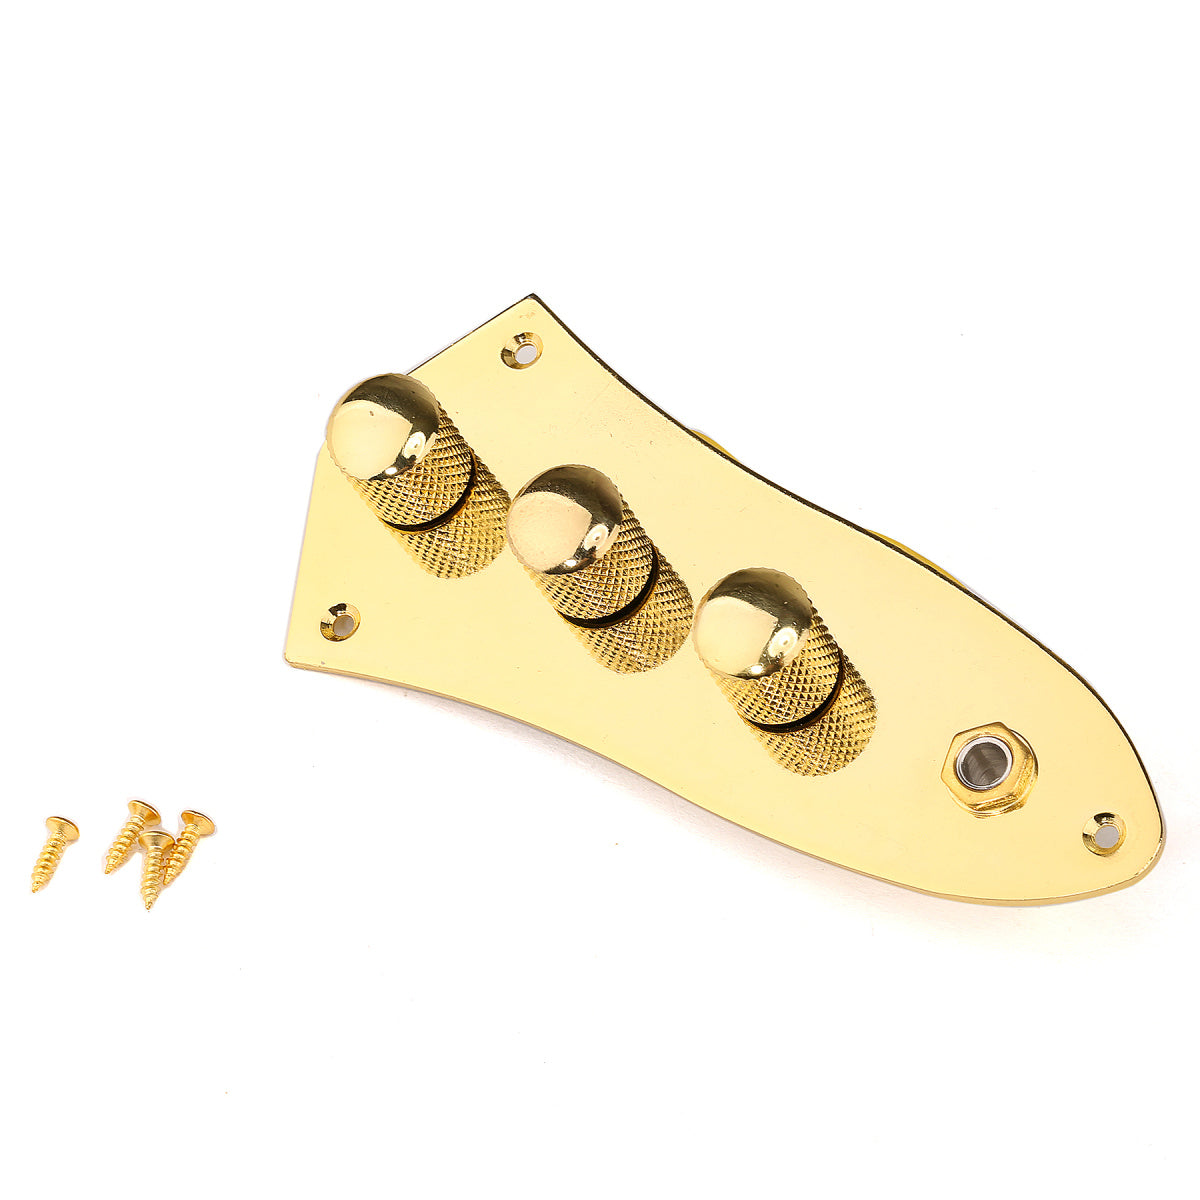 Musiclily Loaded Prewired Jazz Bass Control Plate for J Bass Style Guitar,Gold